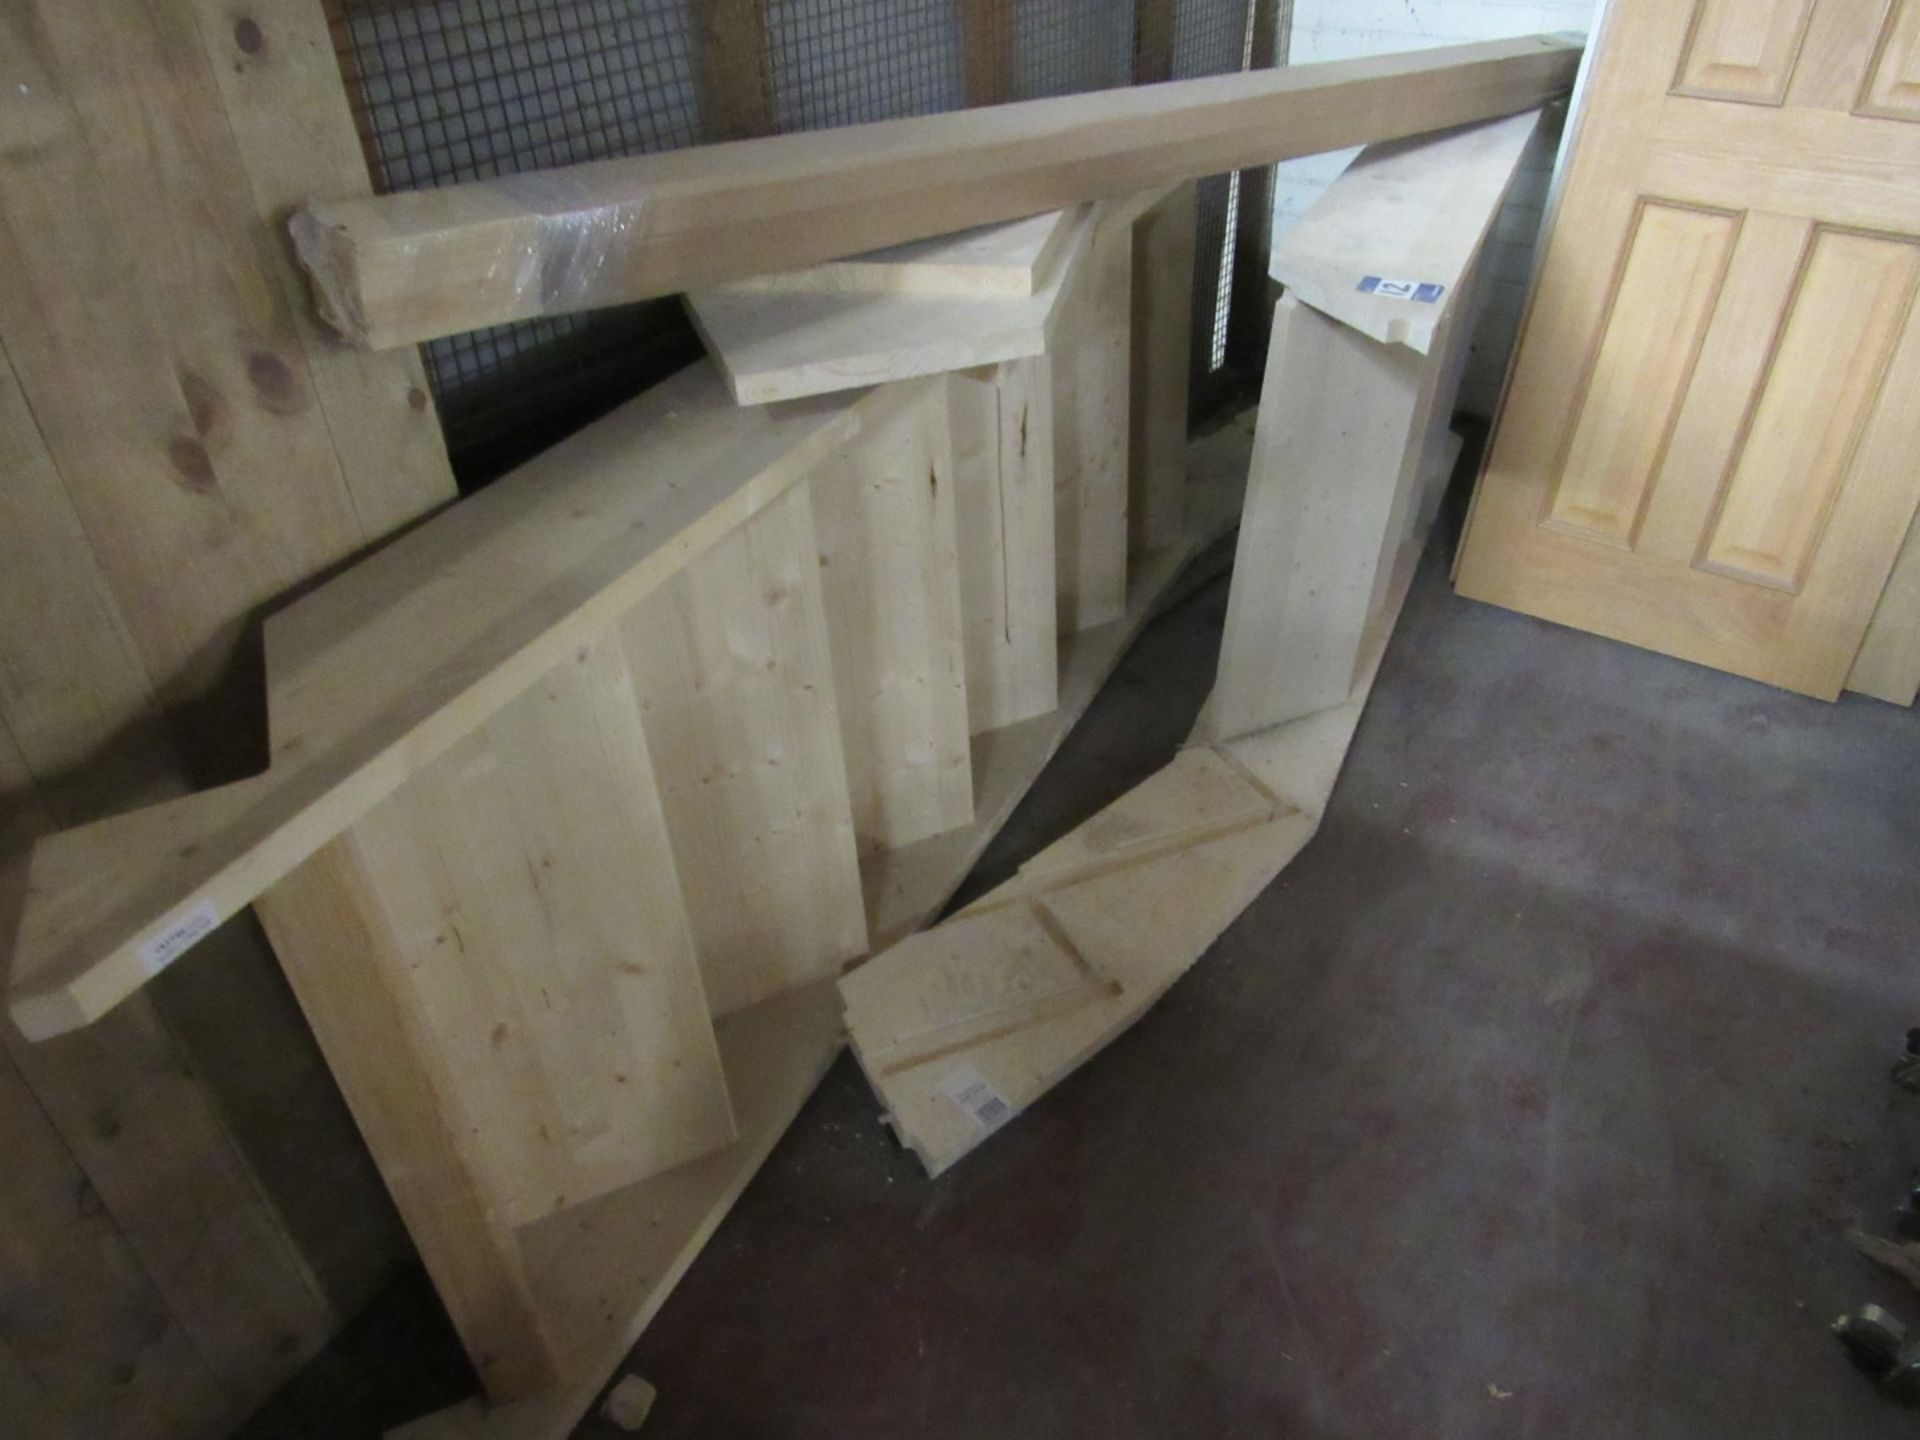 Timber corner staircase - Image 3 of 5